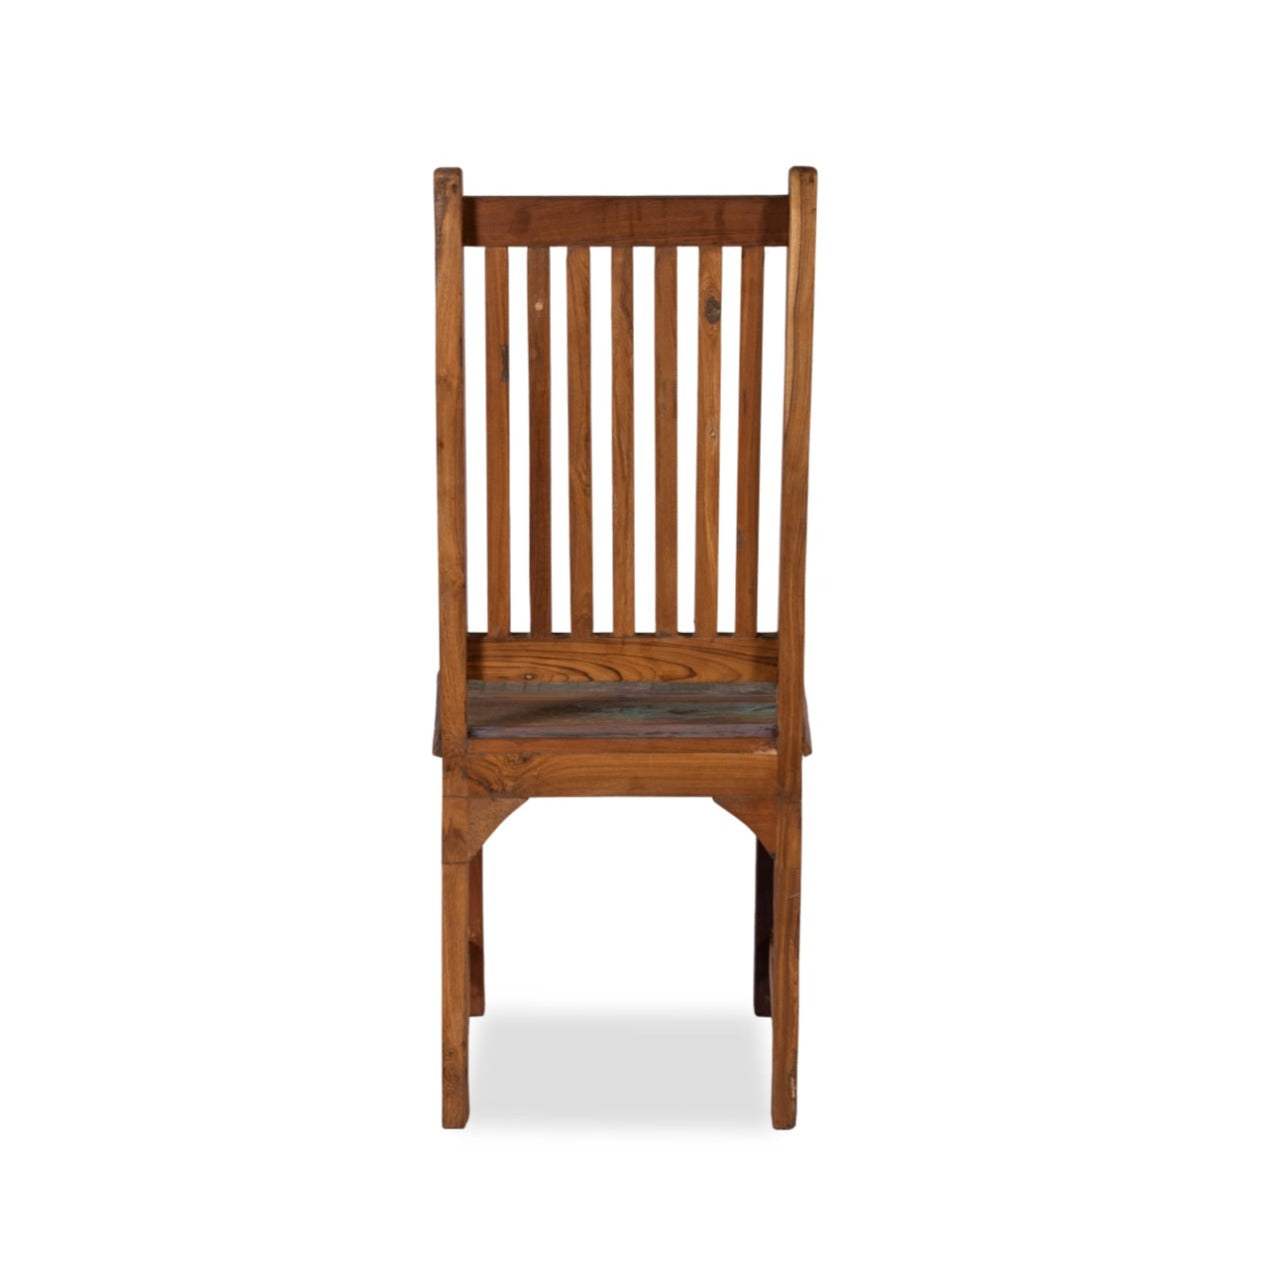 buy dining chairs online